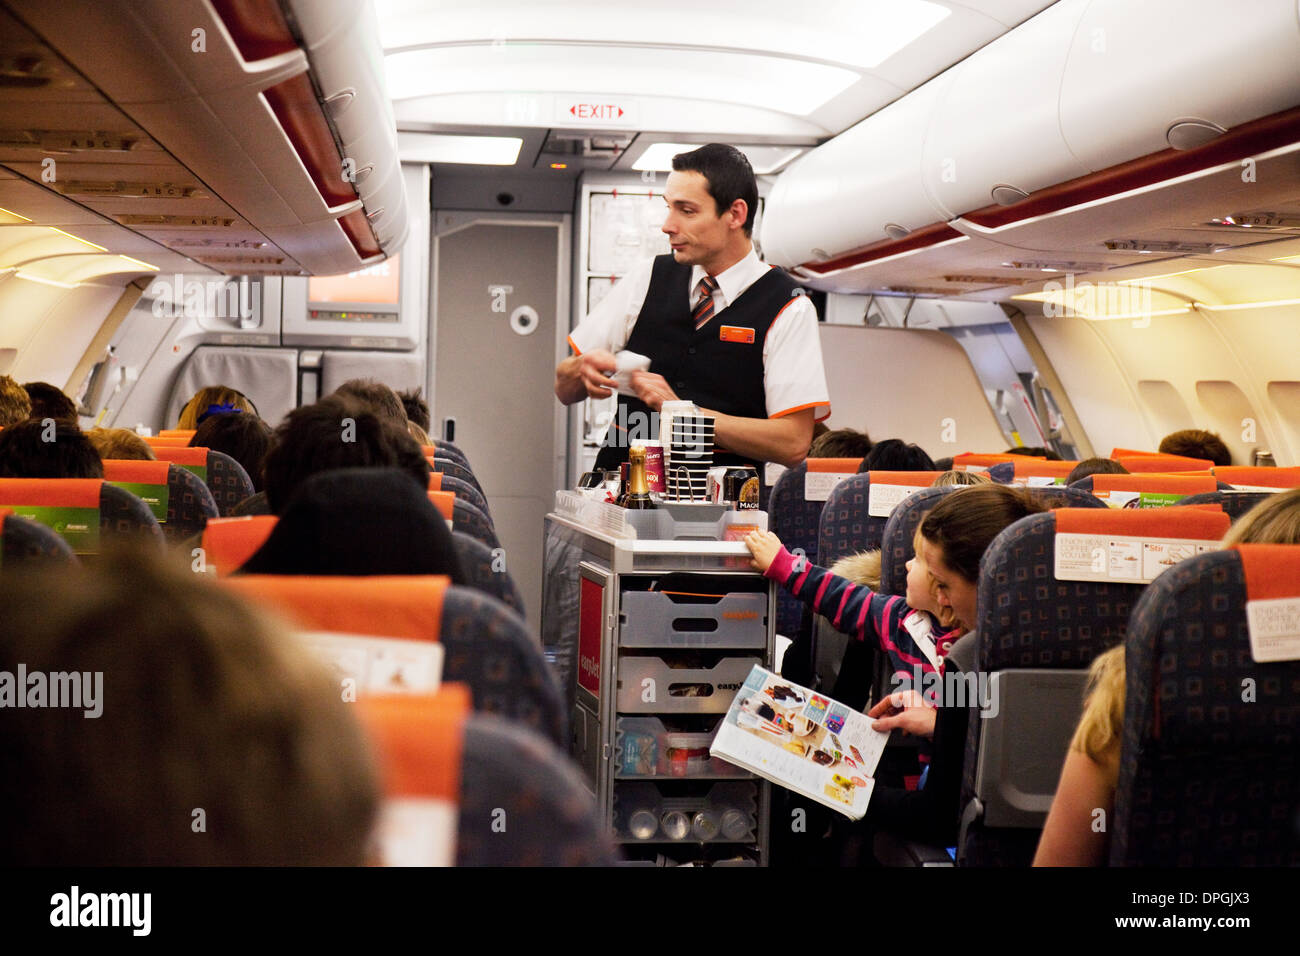 Easyjet cabin crew: Easyjet airline flight attendant staff in the plane serving food and drinks as a meal for passengers Stock Photo